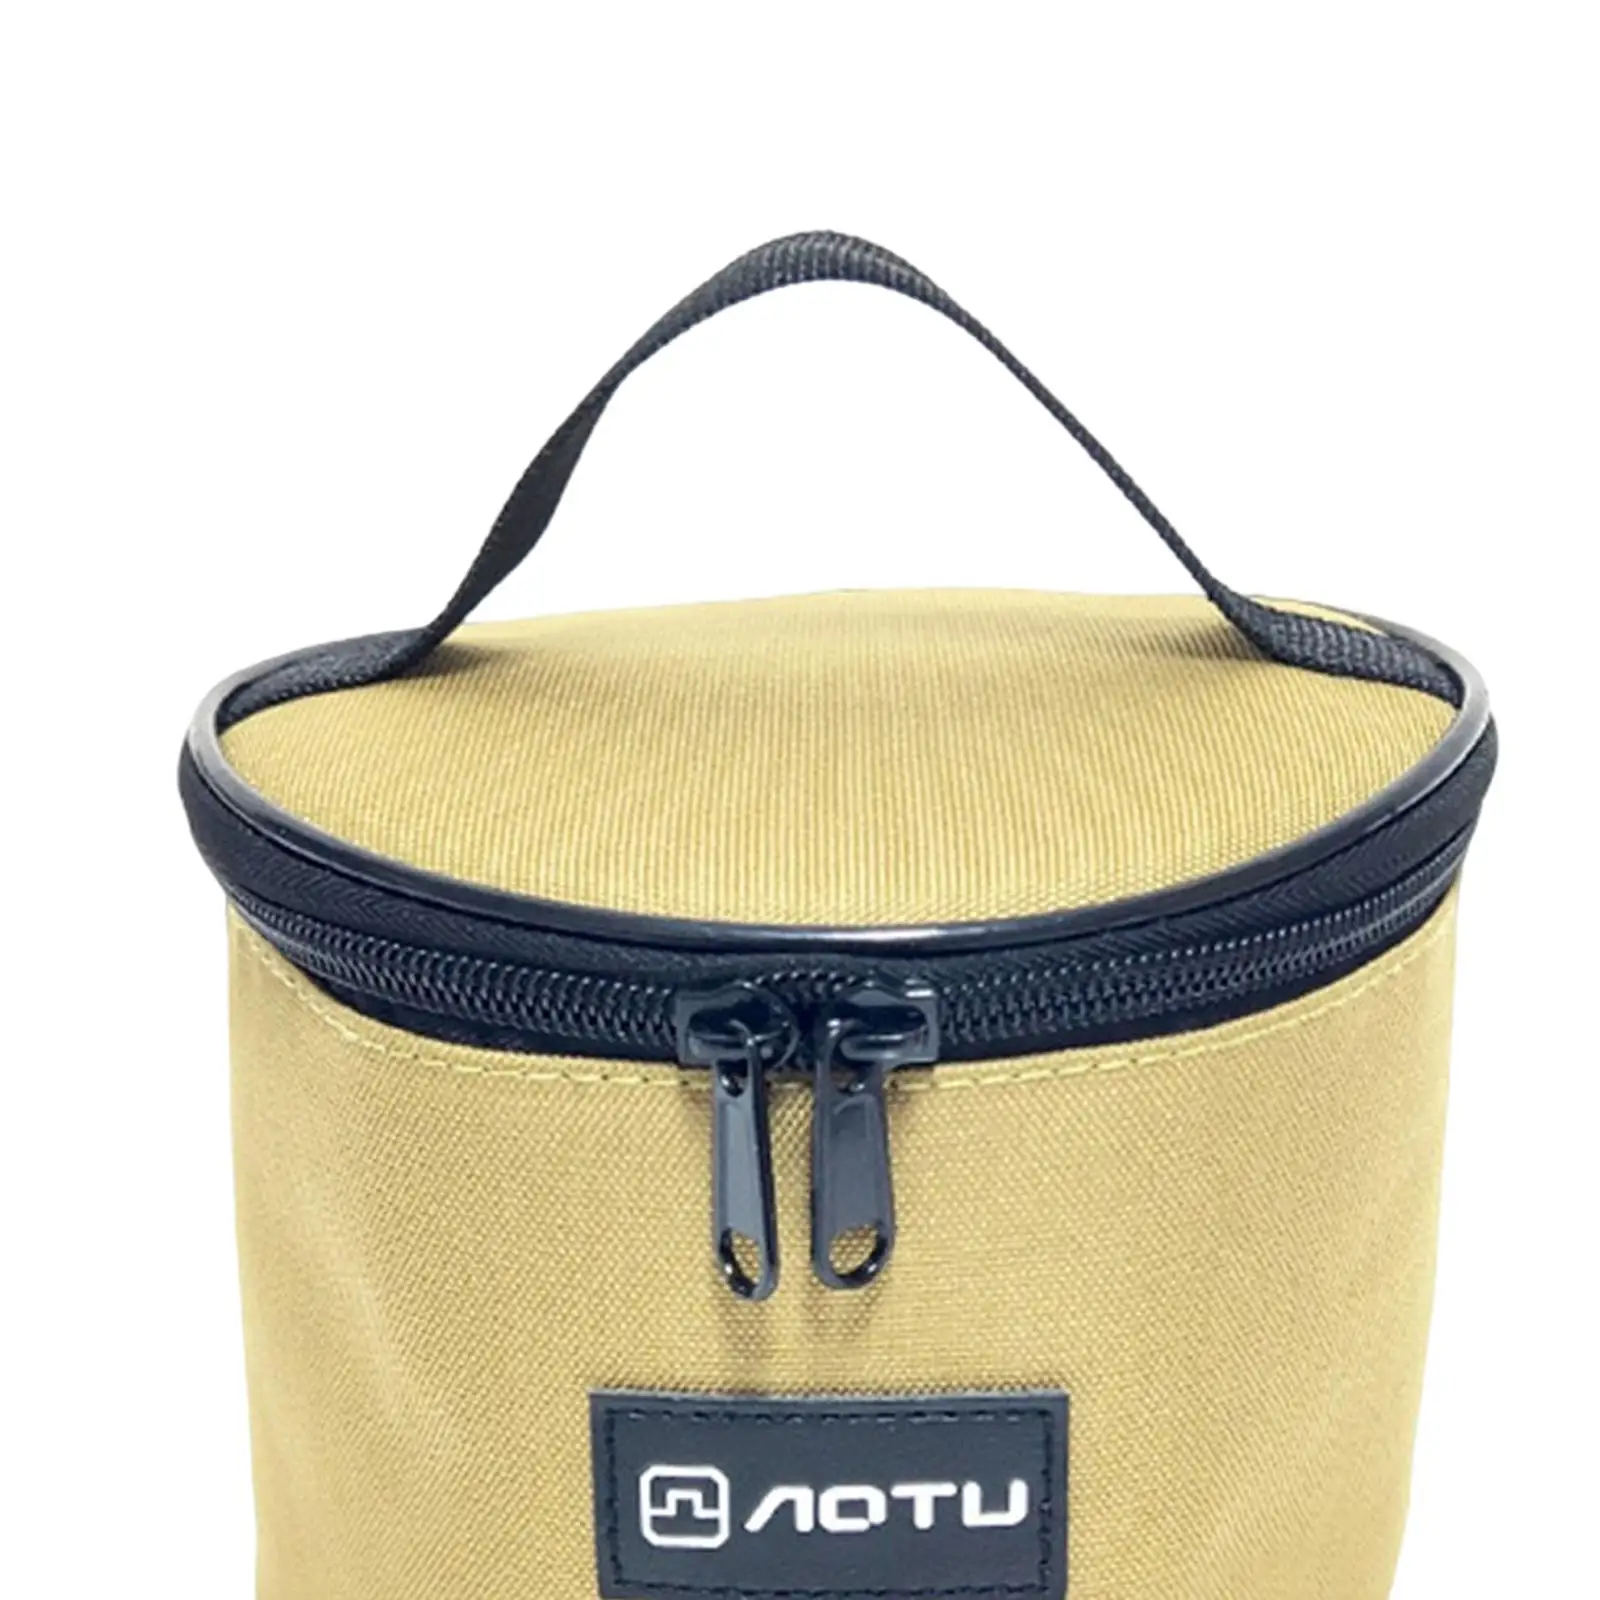 Outdoor Bowl Storage Bag Hiking Organizer Hanging with Handle Picnic Pouch